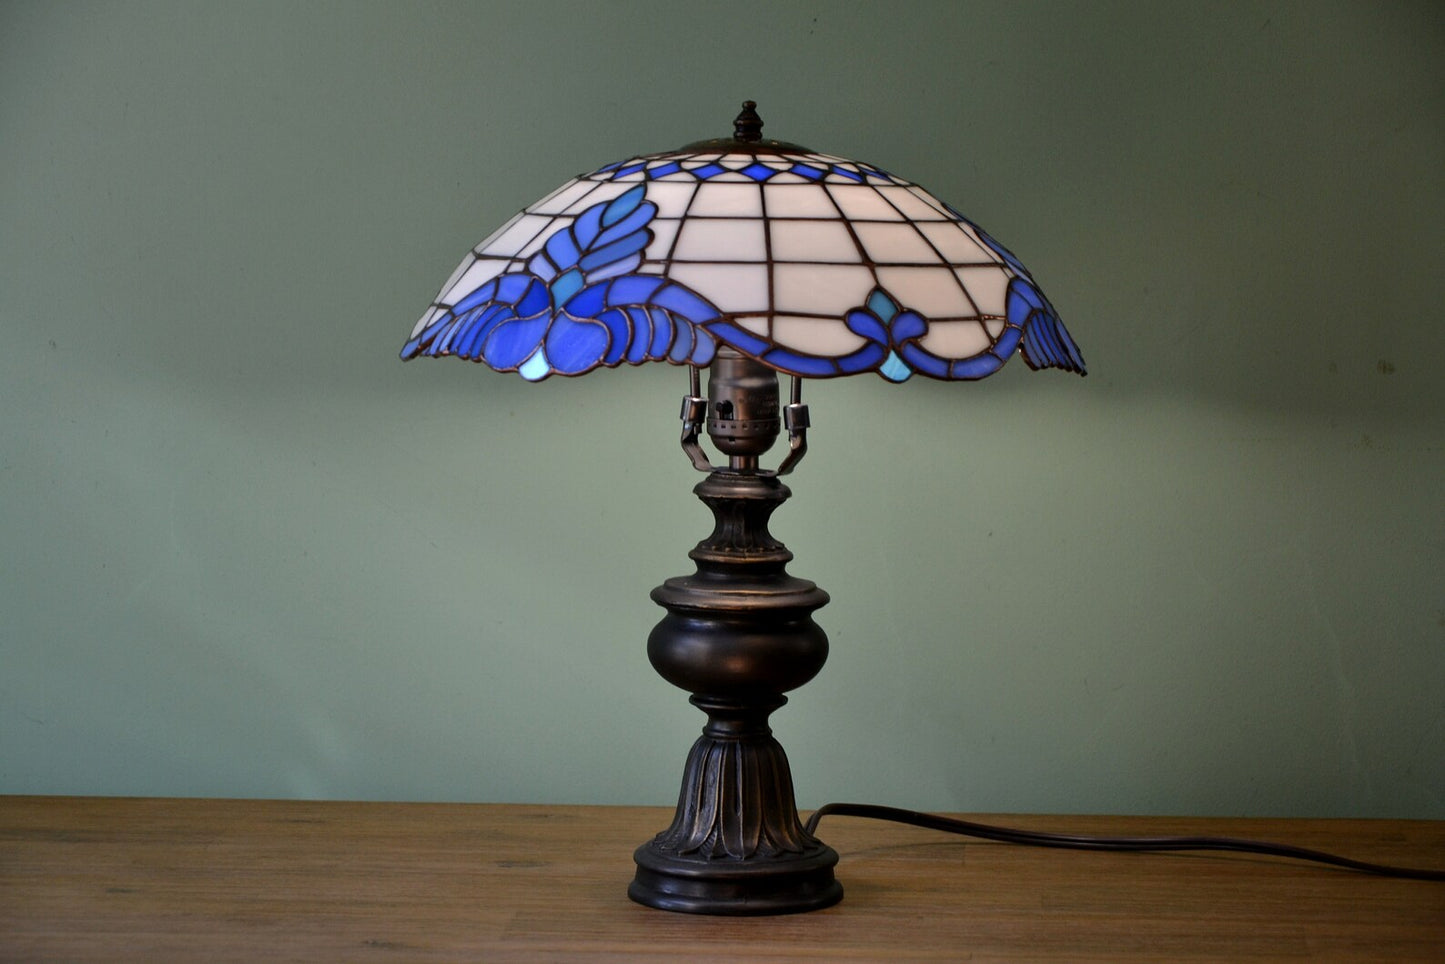 Stained glass table lamp Tiffany style Classic Tiffany design Desk lamp White & blue lamp Baroc pattern Mother's day gift Living room decor